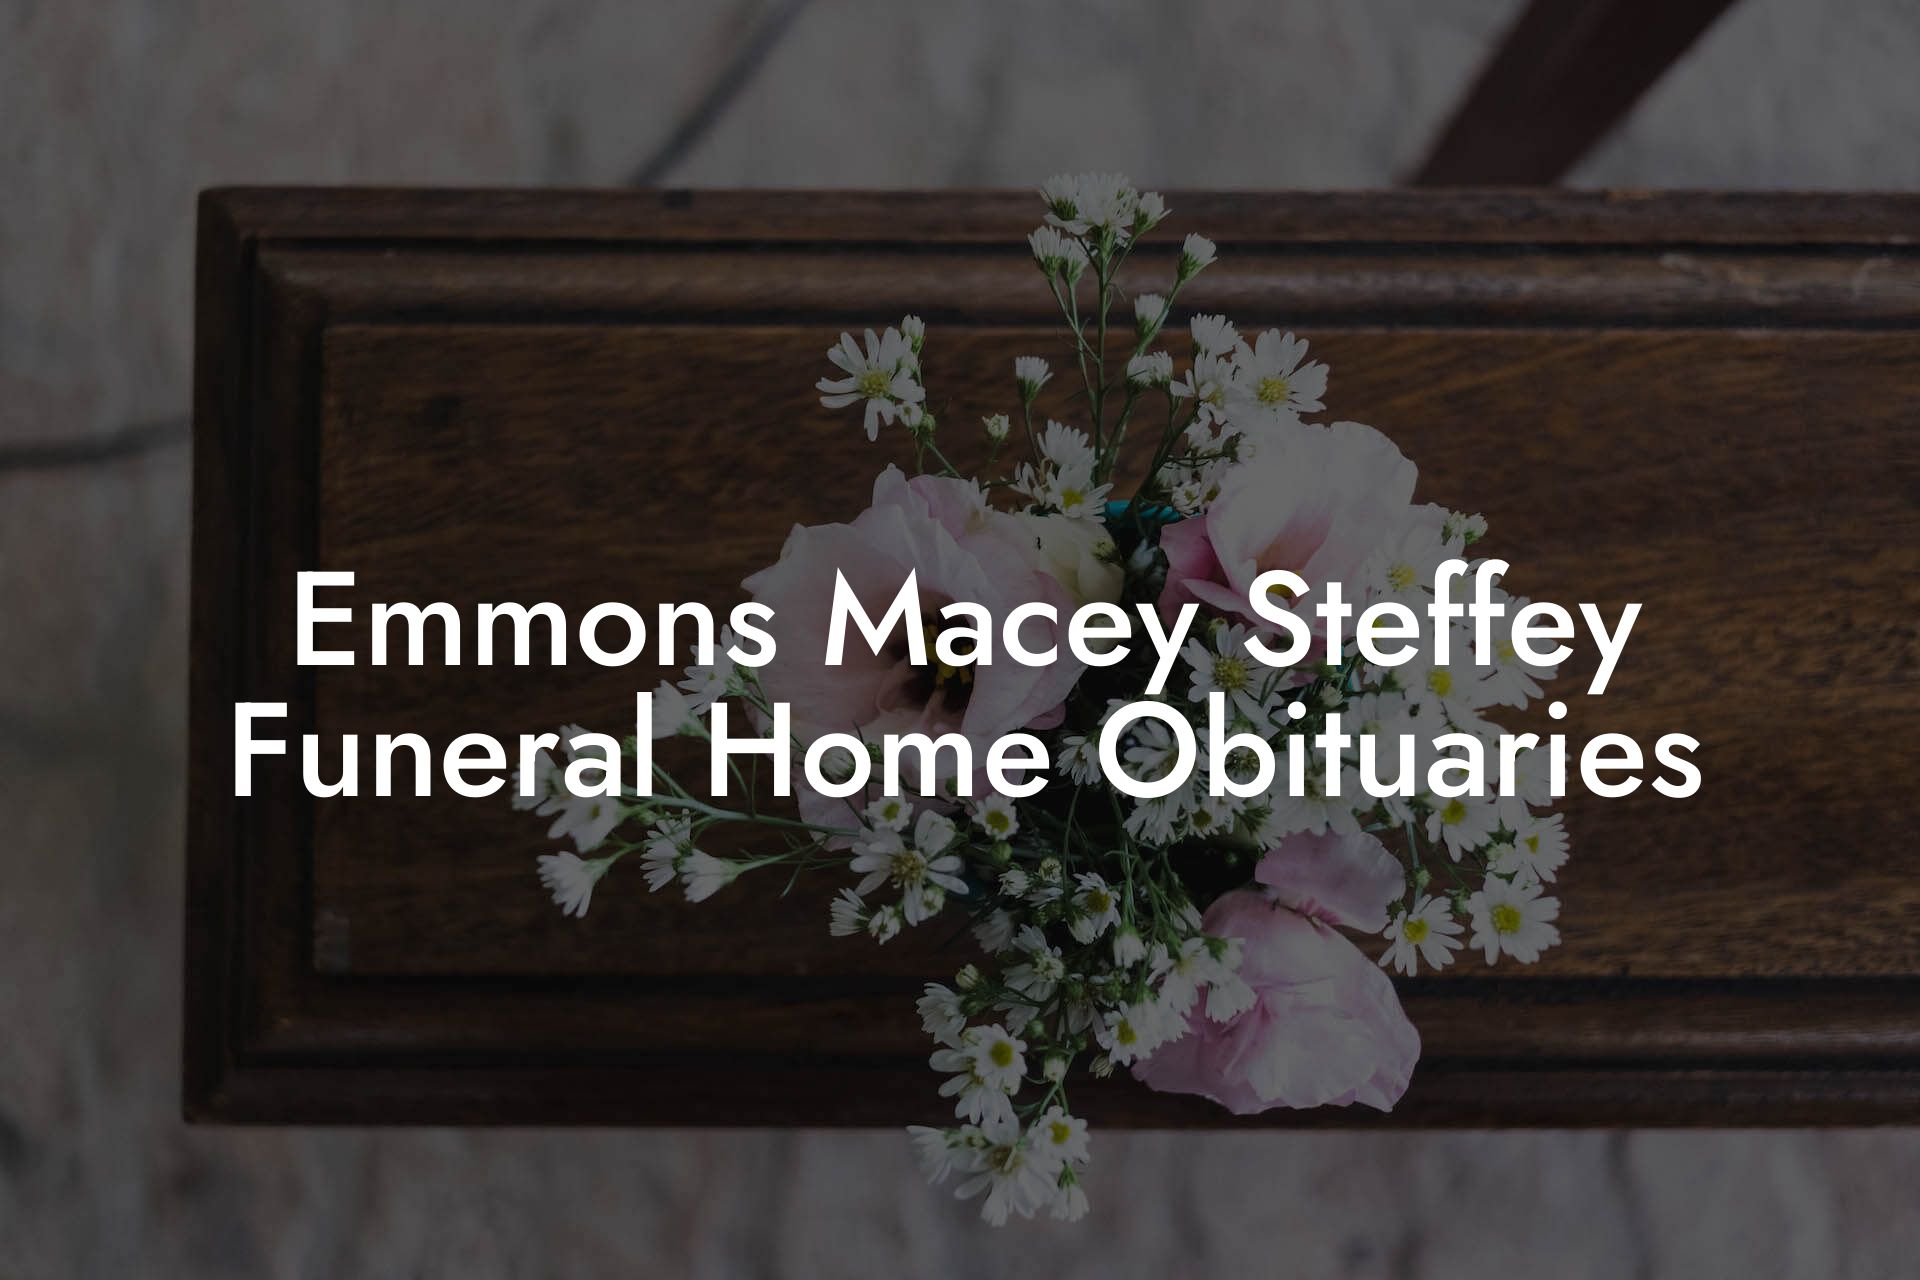 Emmons Macey Steffey Funeral Home Obituaries